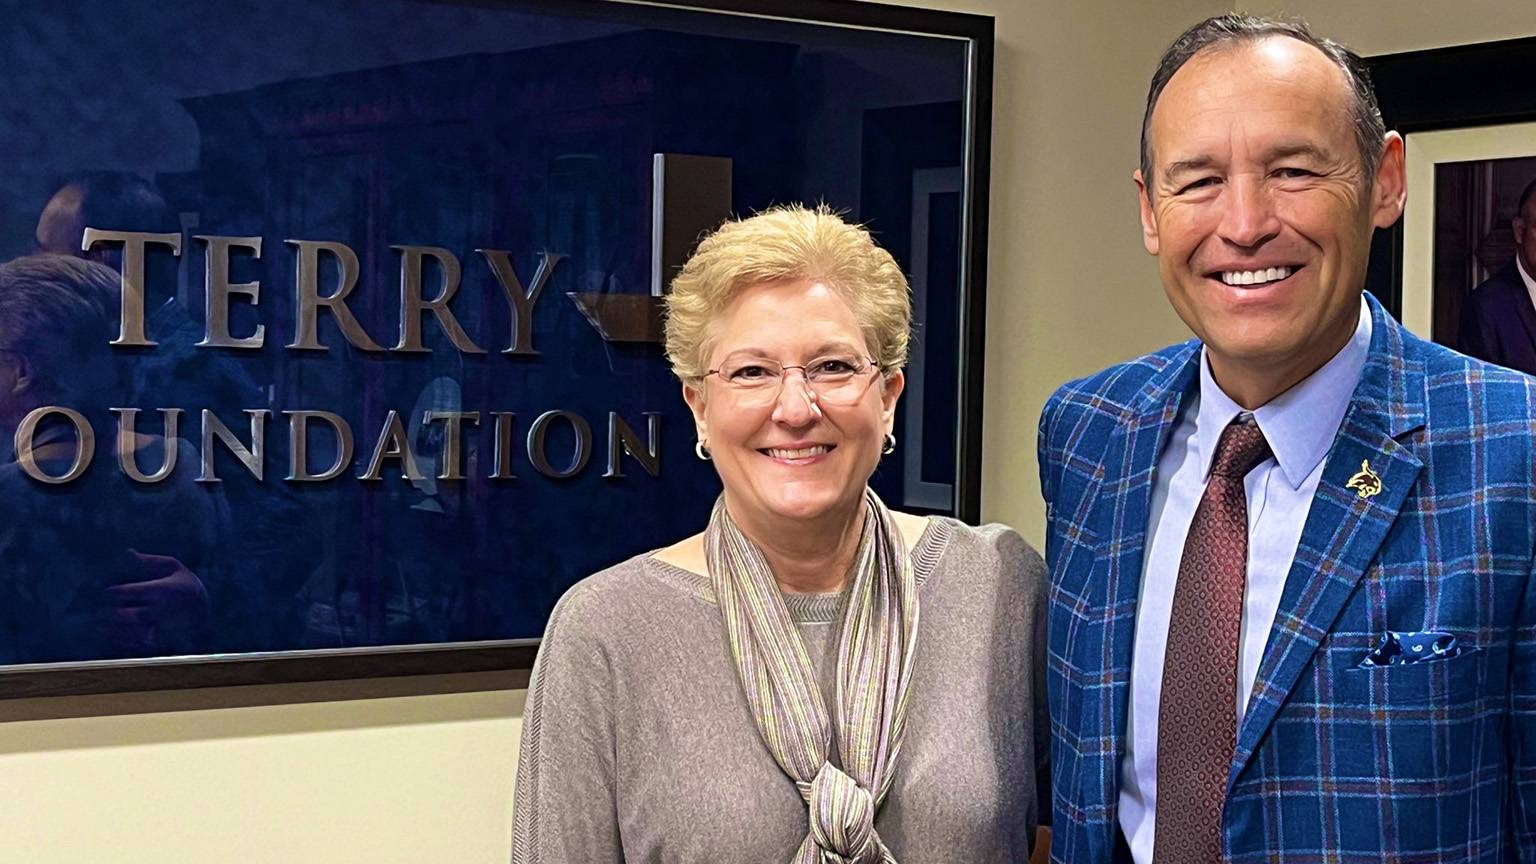 President Damphousse, right, poses for a photo with Yvonne Moody in front of the Terry Foundation sign.